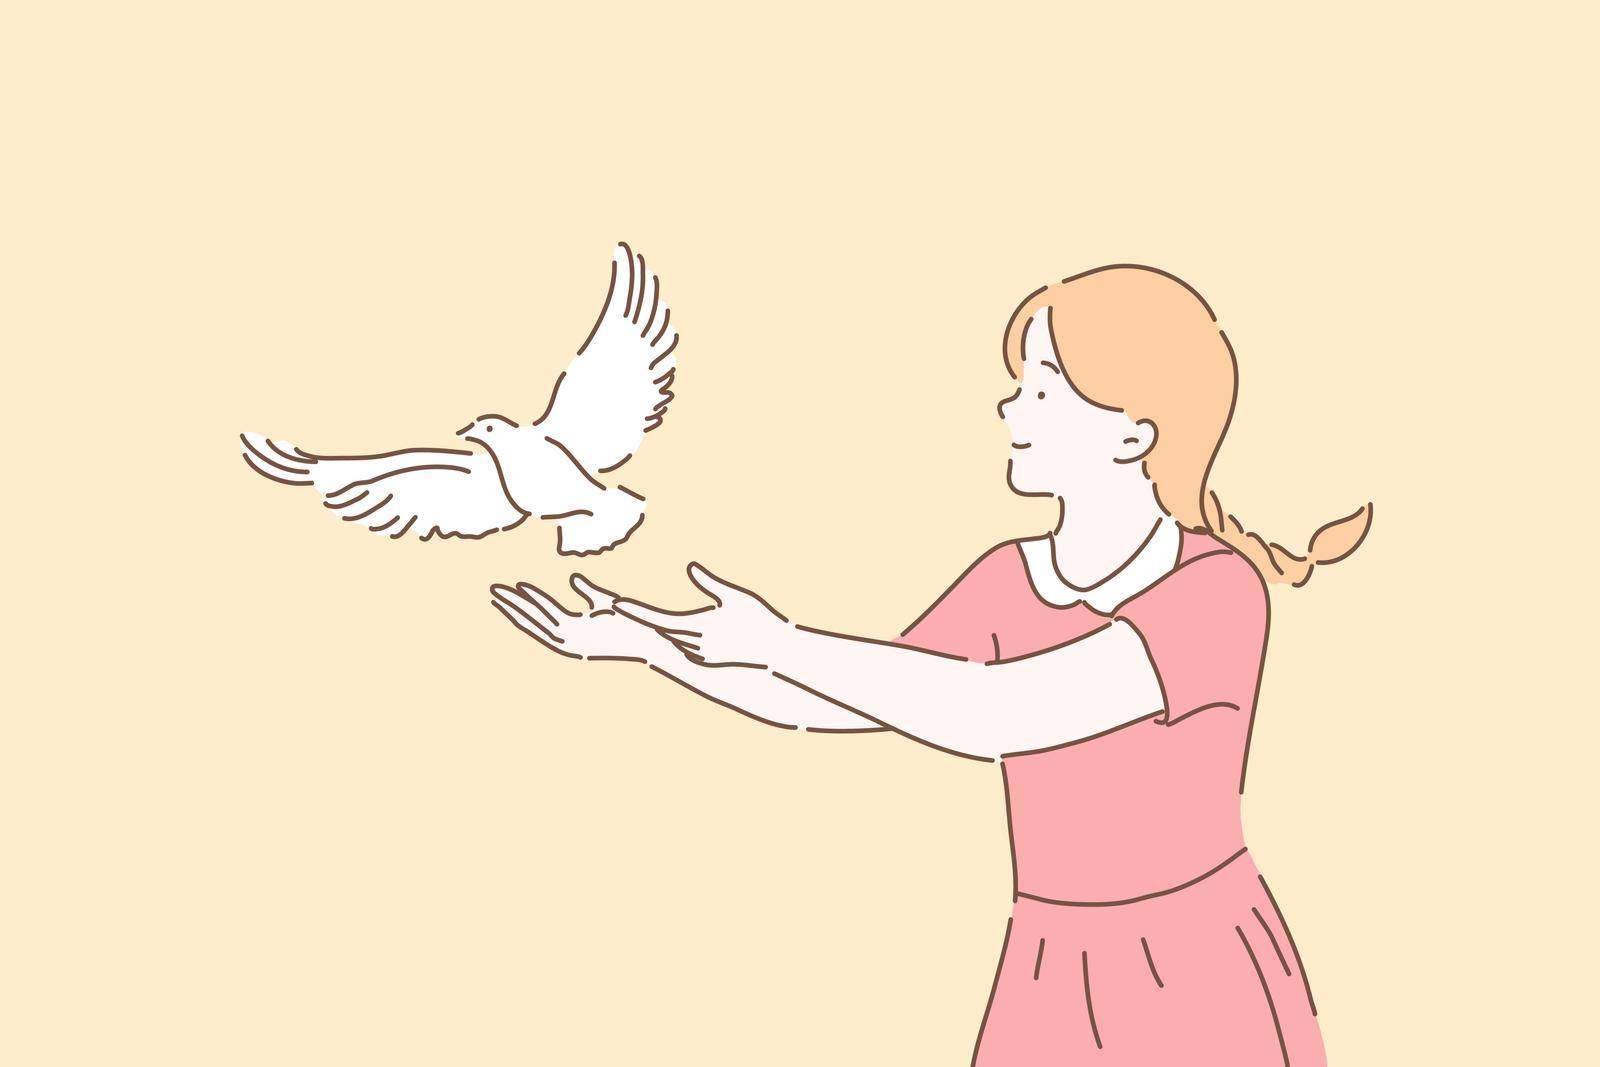 Peace symbol, freedom metaphor concept. Girl letting go white dove, cute kid setting free pigeon with open arms gesture, female volunteer taking care of birds. Simple flat vector